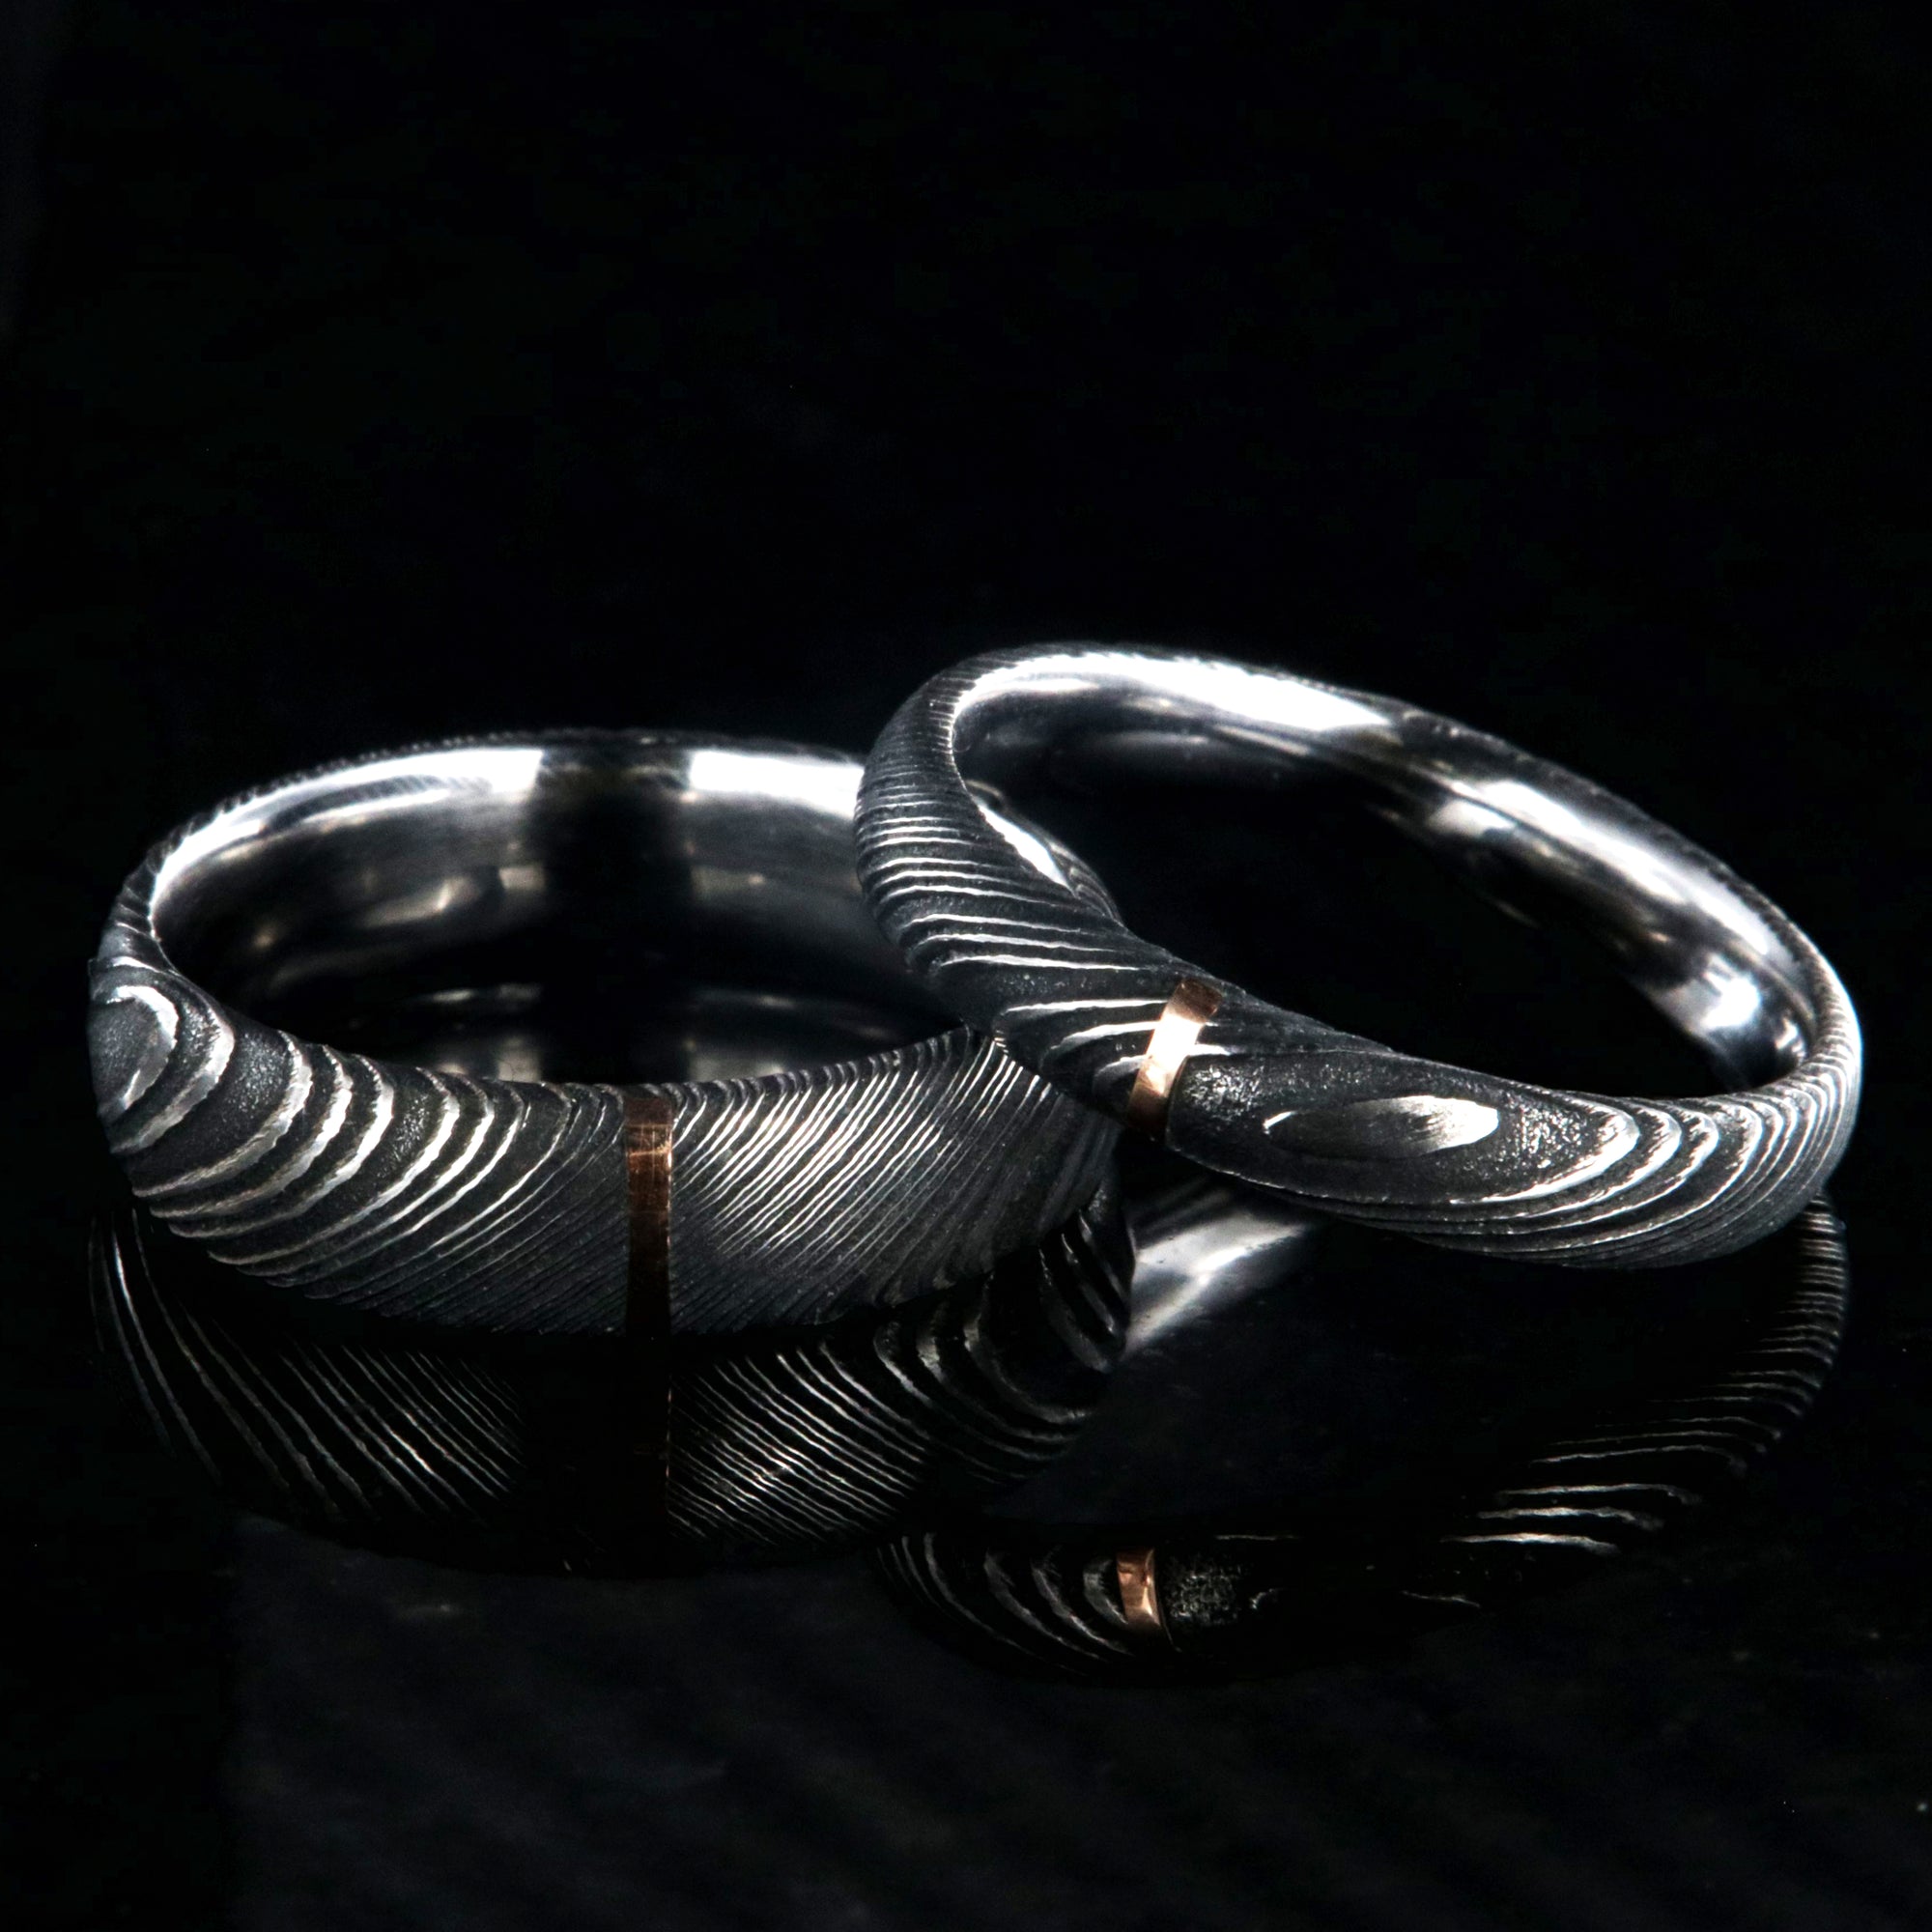 A matching set of Damascus steel wedding ring with a 6mm and 4mm wide bands with a single vertical rose gold inlay